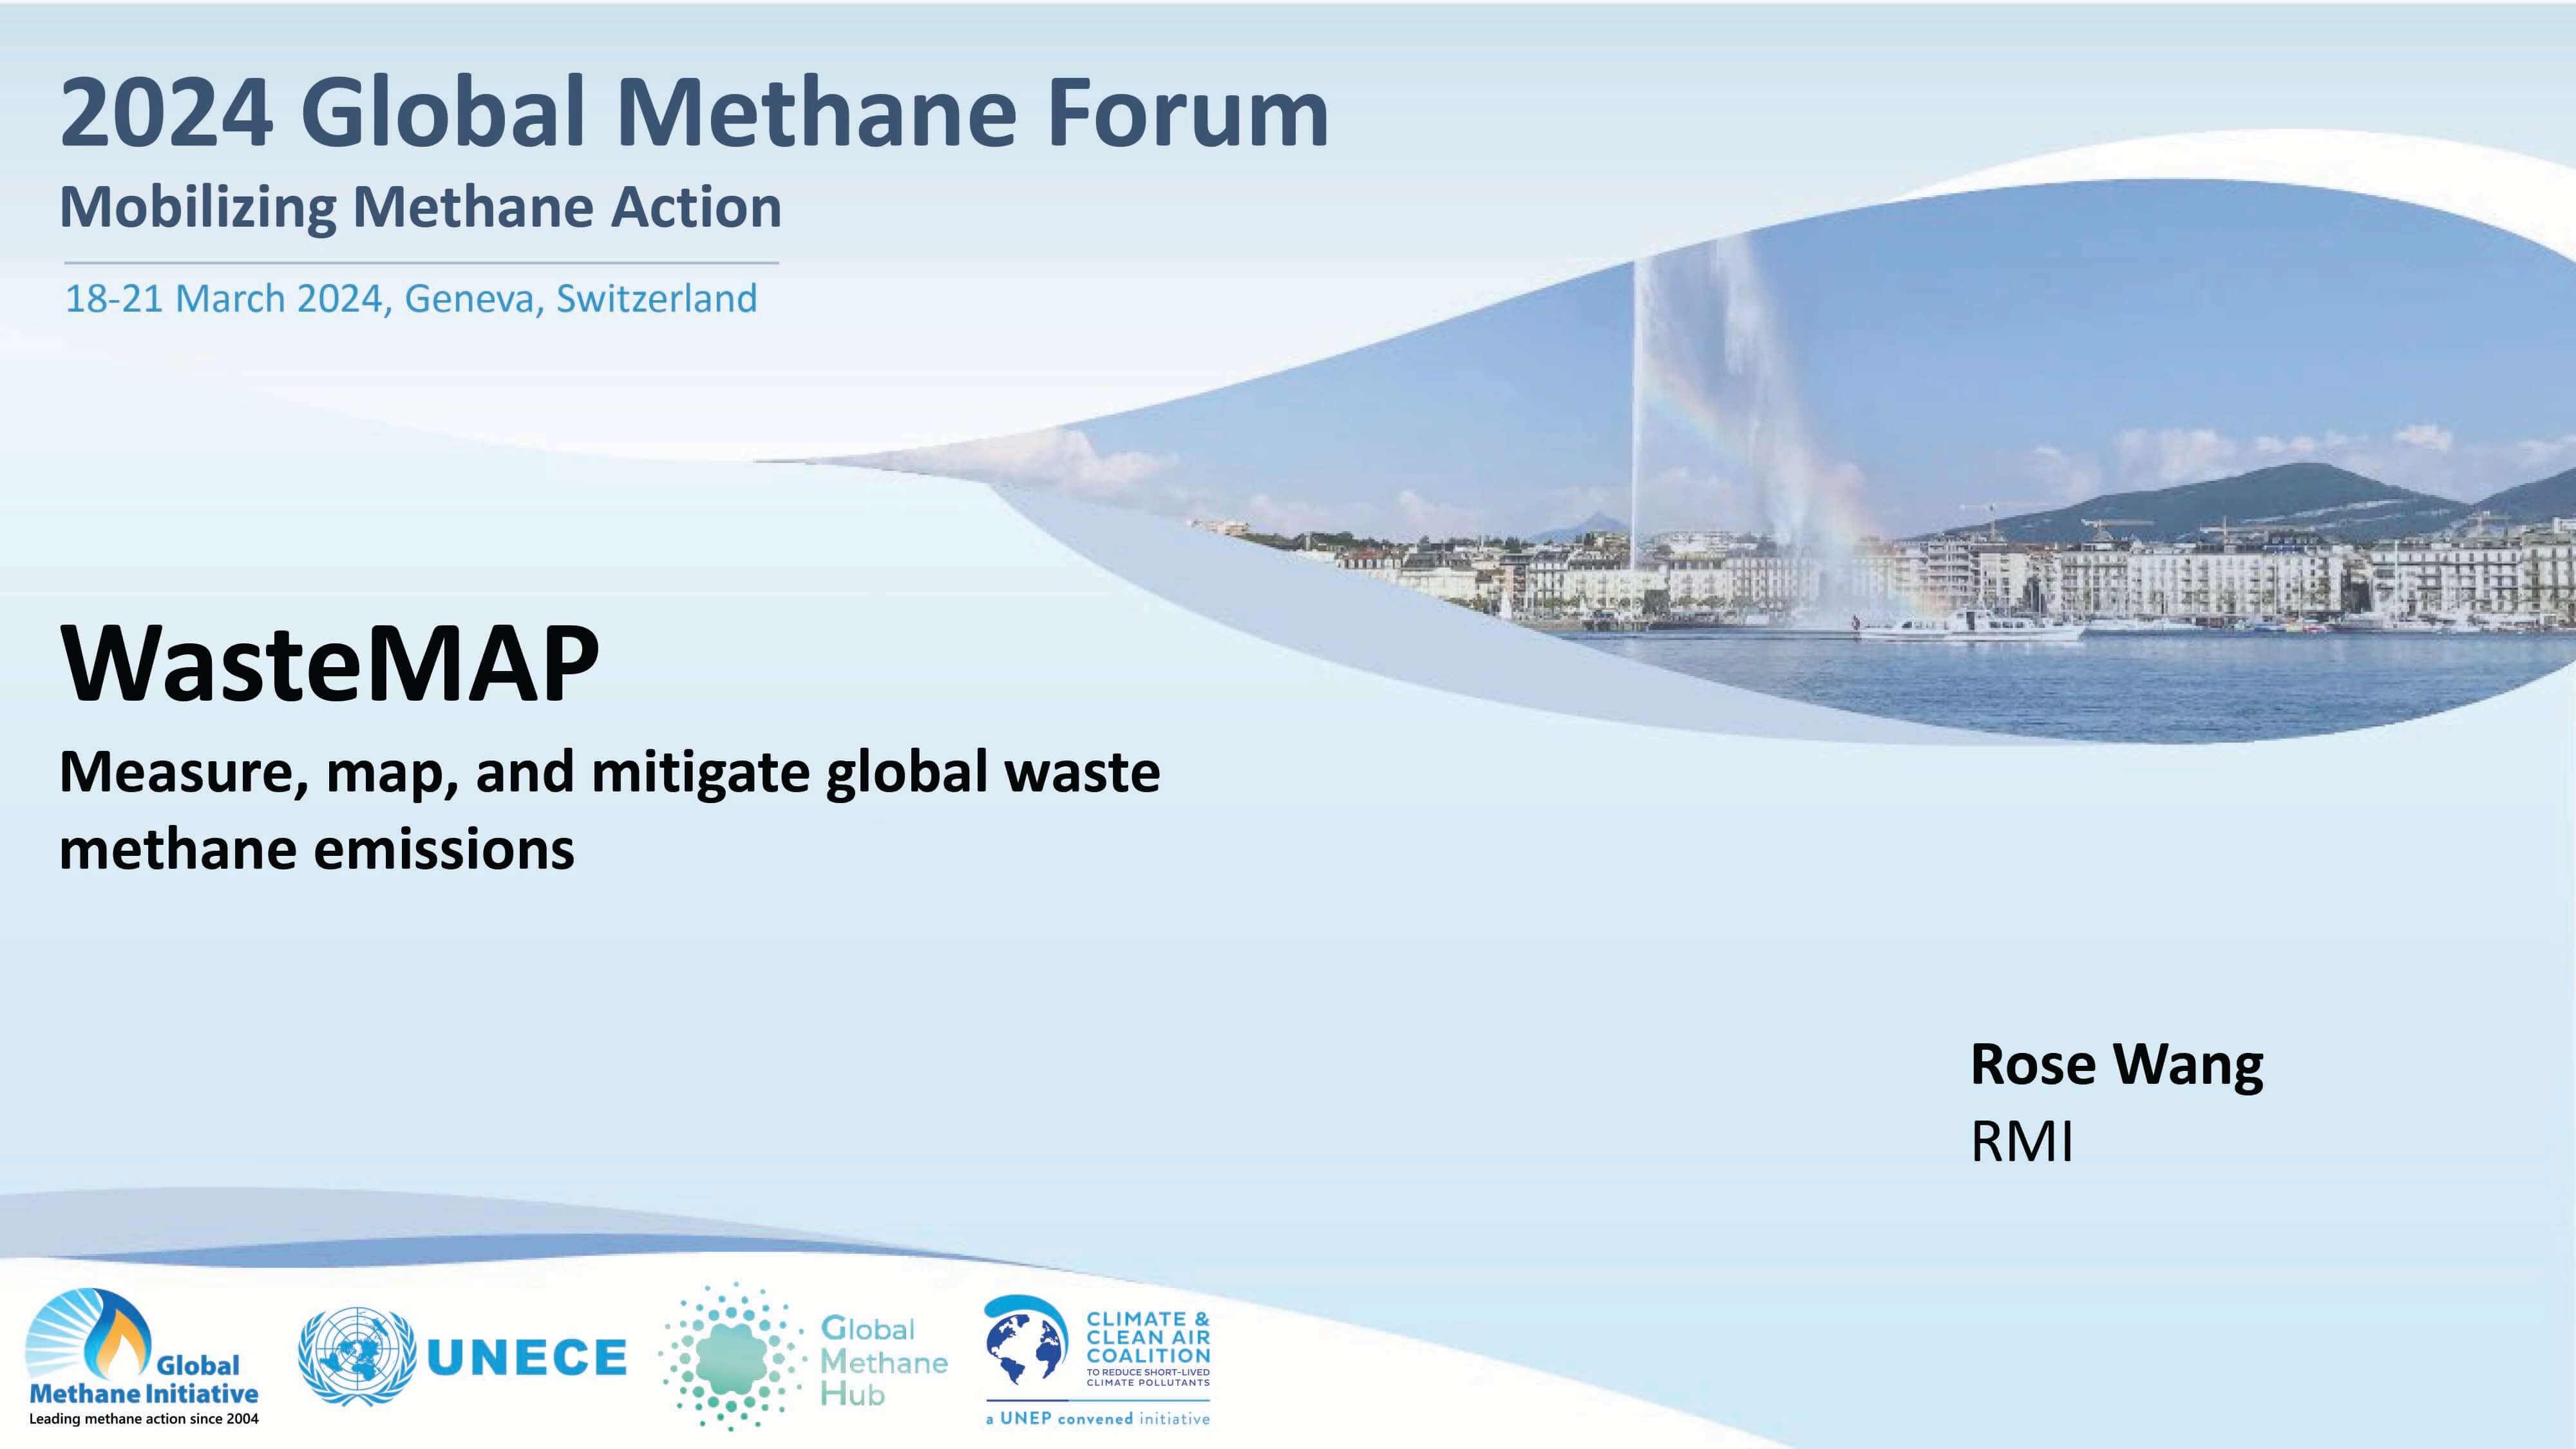 WasteMAP: Measure, map, and mitigate global waste methane emissions